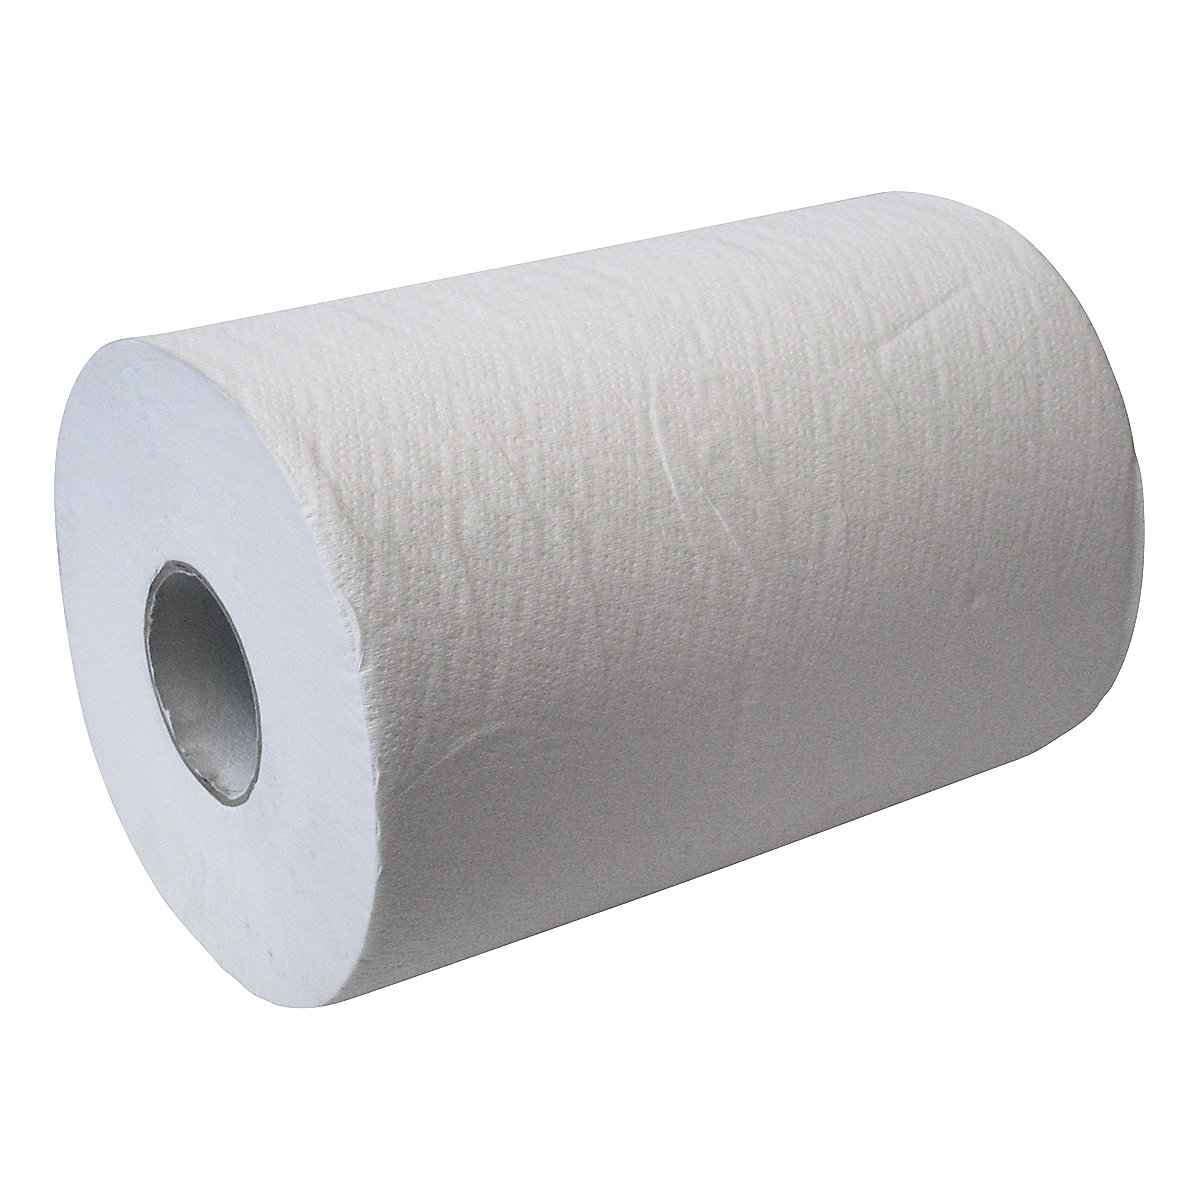 Roll of paper towels - CWS